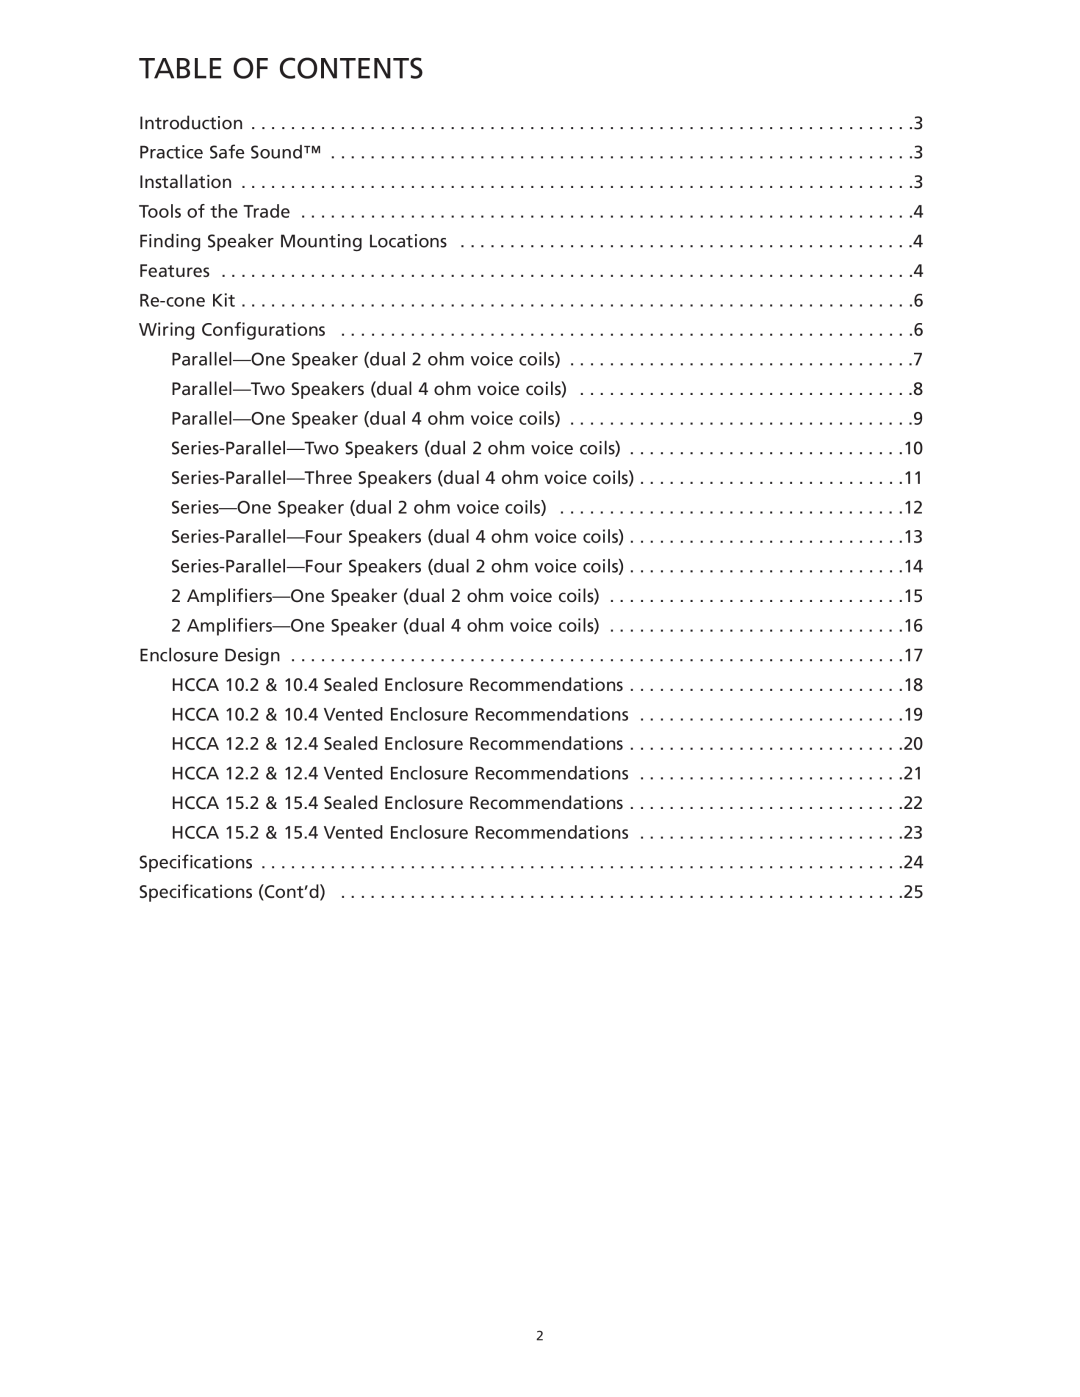 Orion Car Audio HCCA 12.2, HCCA 10.2, HCCA 15.2, HCCA 10.4, HCCA 12.04, HCCA 15.4 manual Table Of Contents 